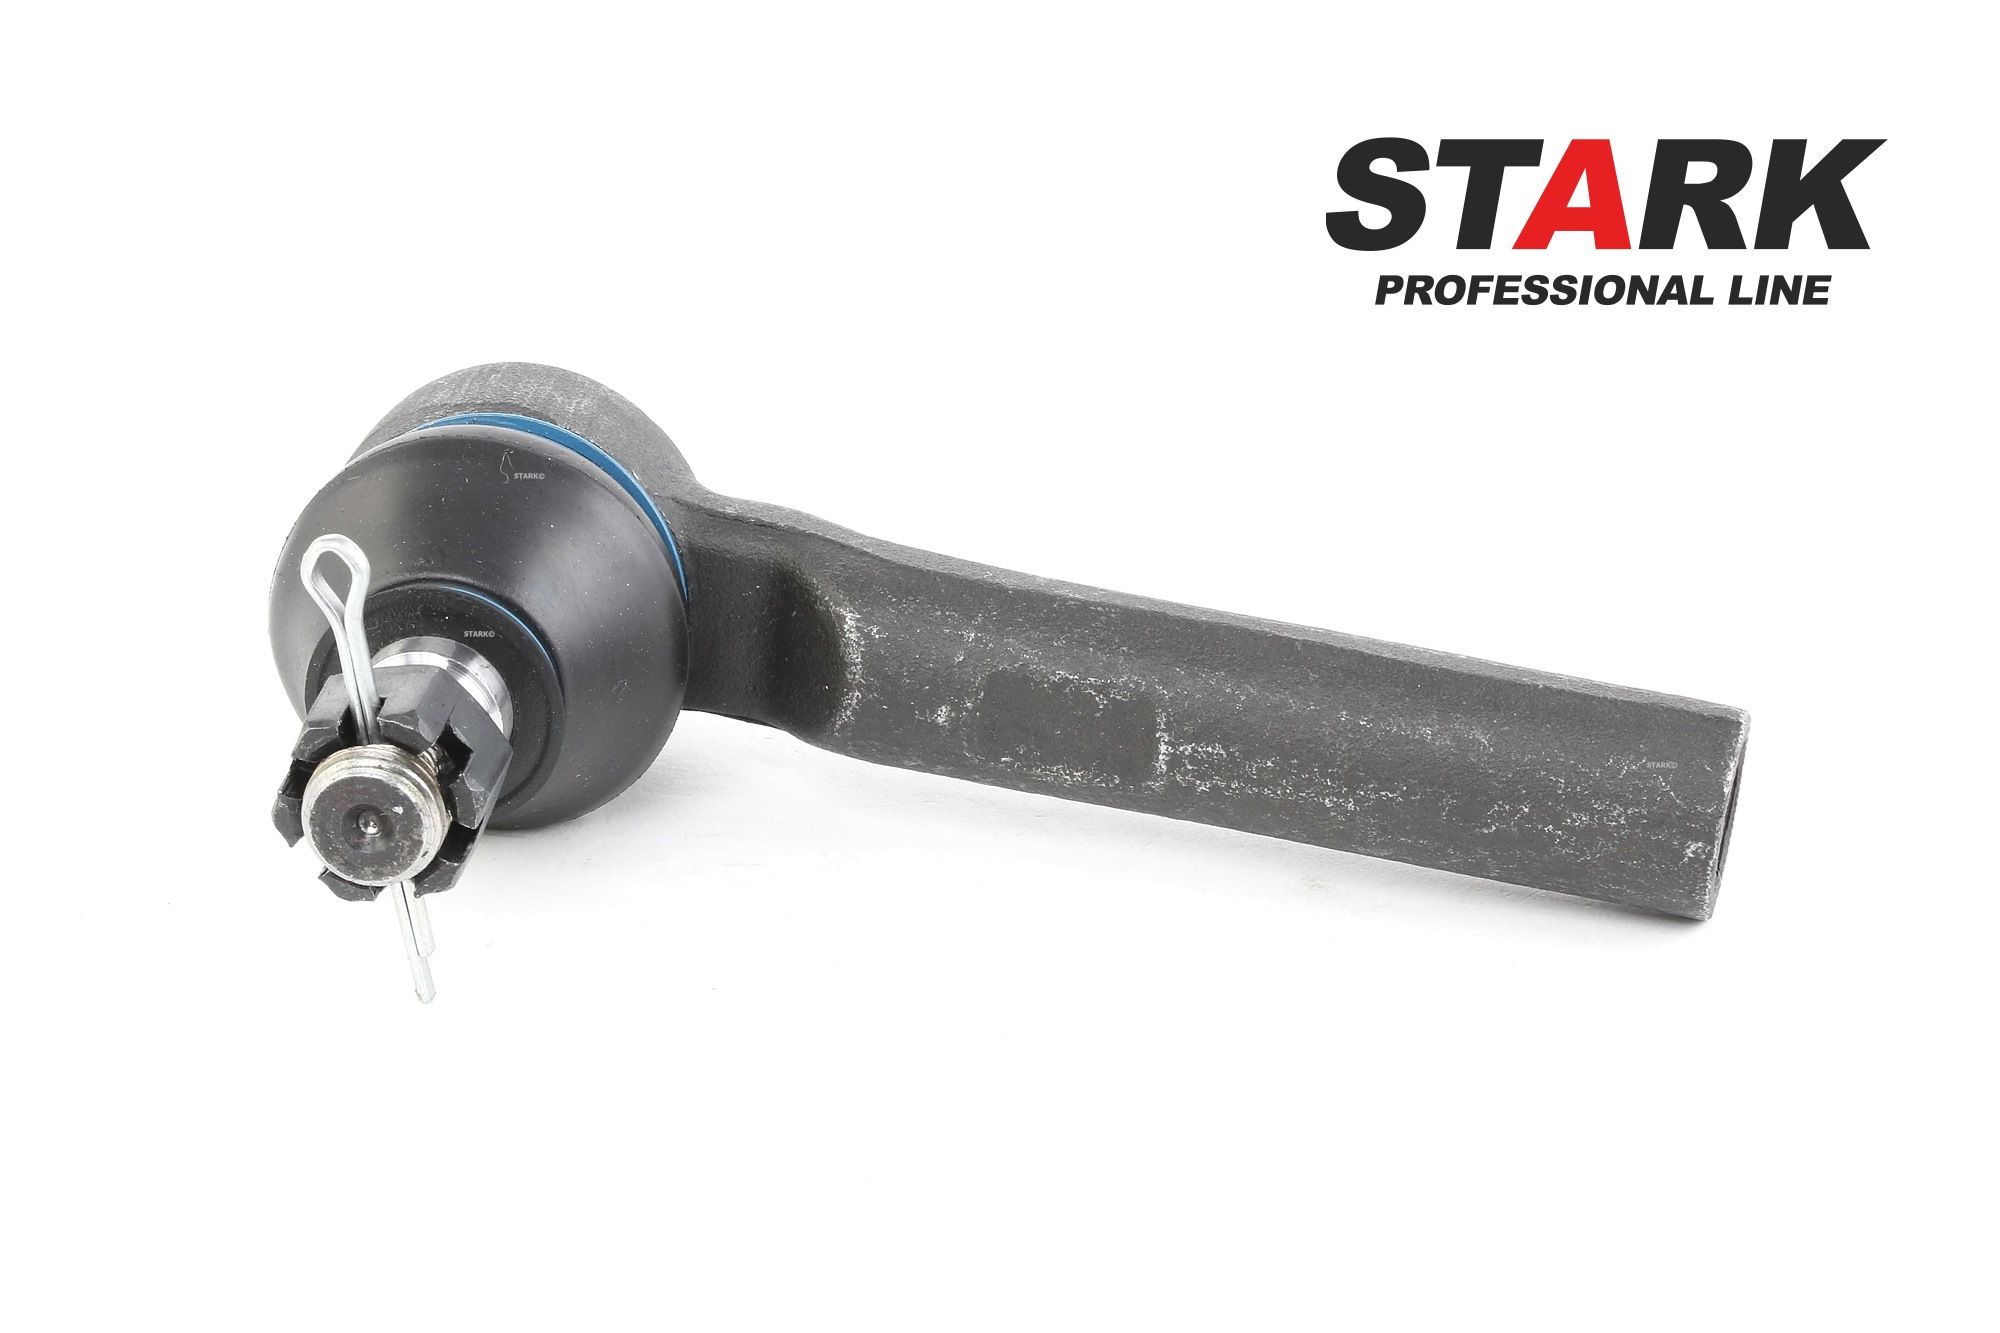 STARK SKTE-0280294 Track rod end Cone Size 15,25 mm, M14X1.5, Front axle both sides, outer